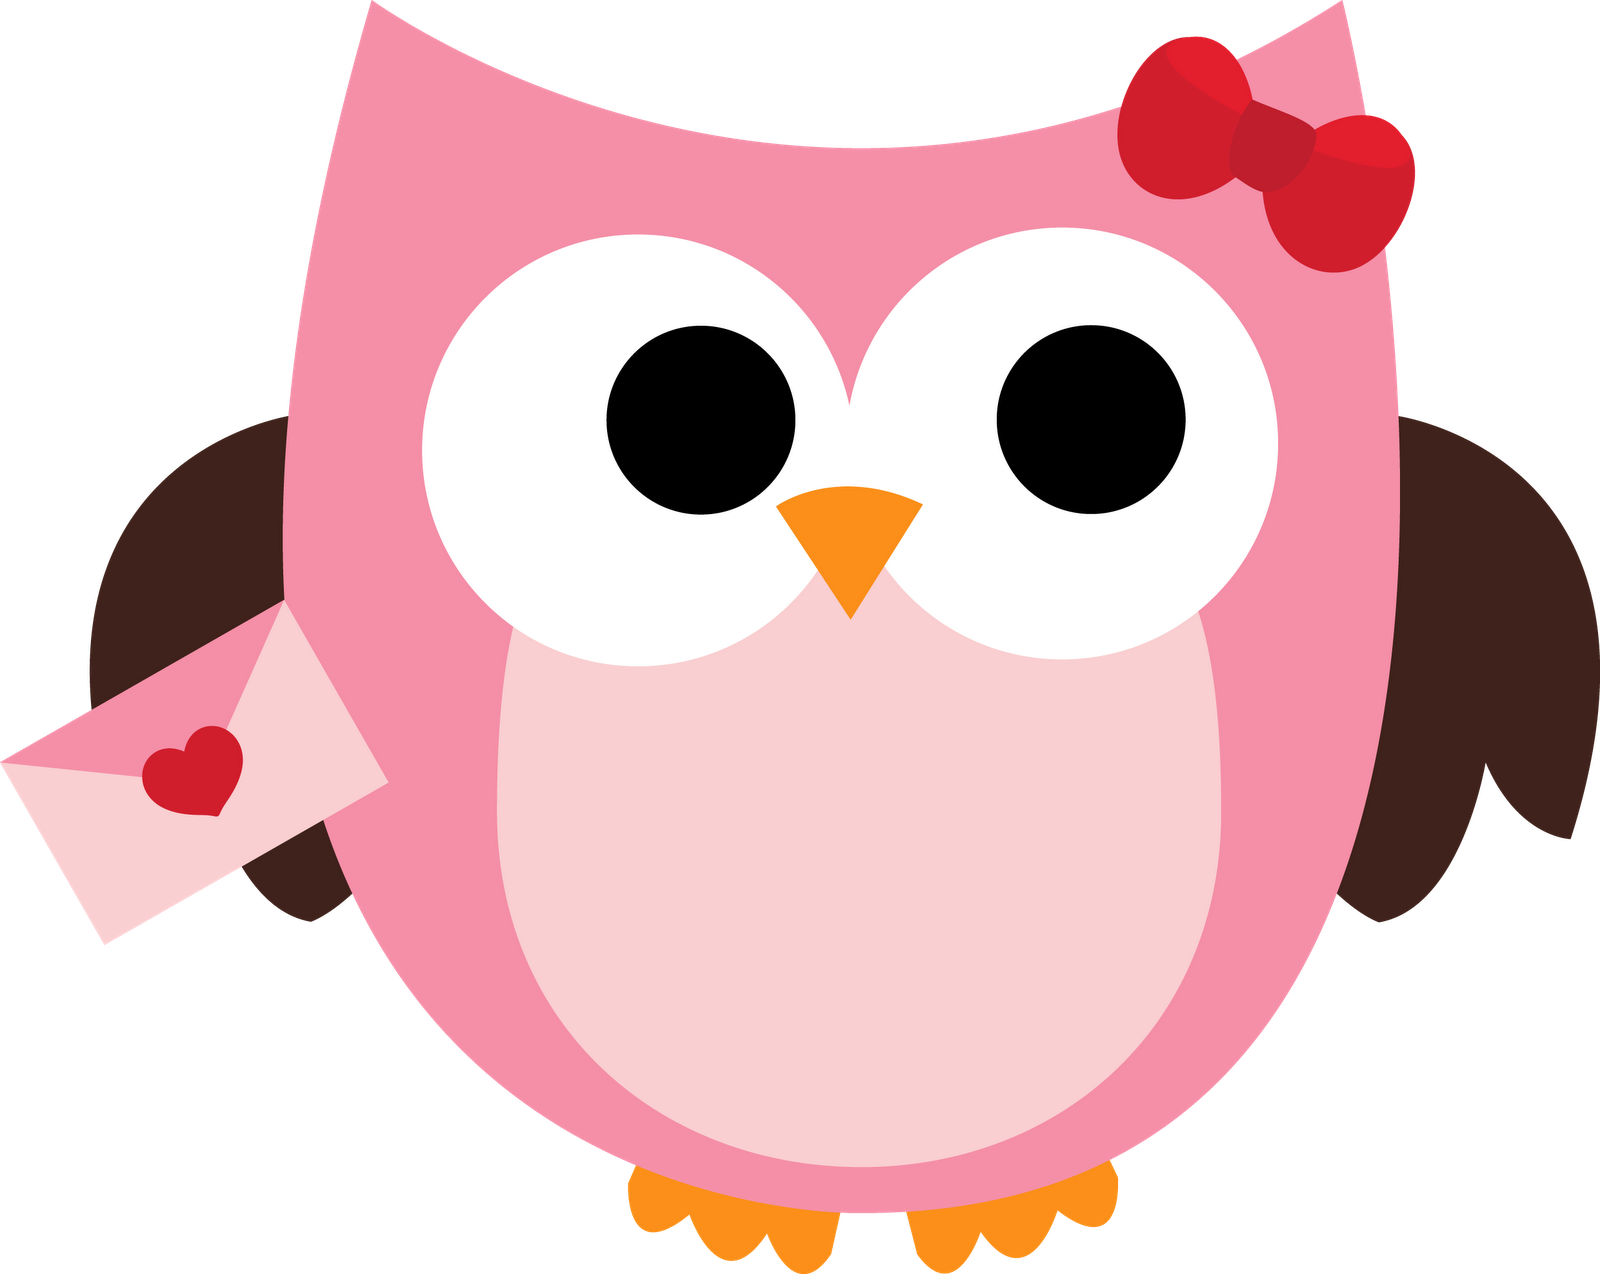 Owl Clip Cake Ideas and Designs - Clipart library - Clipart library